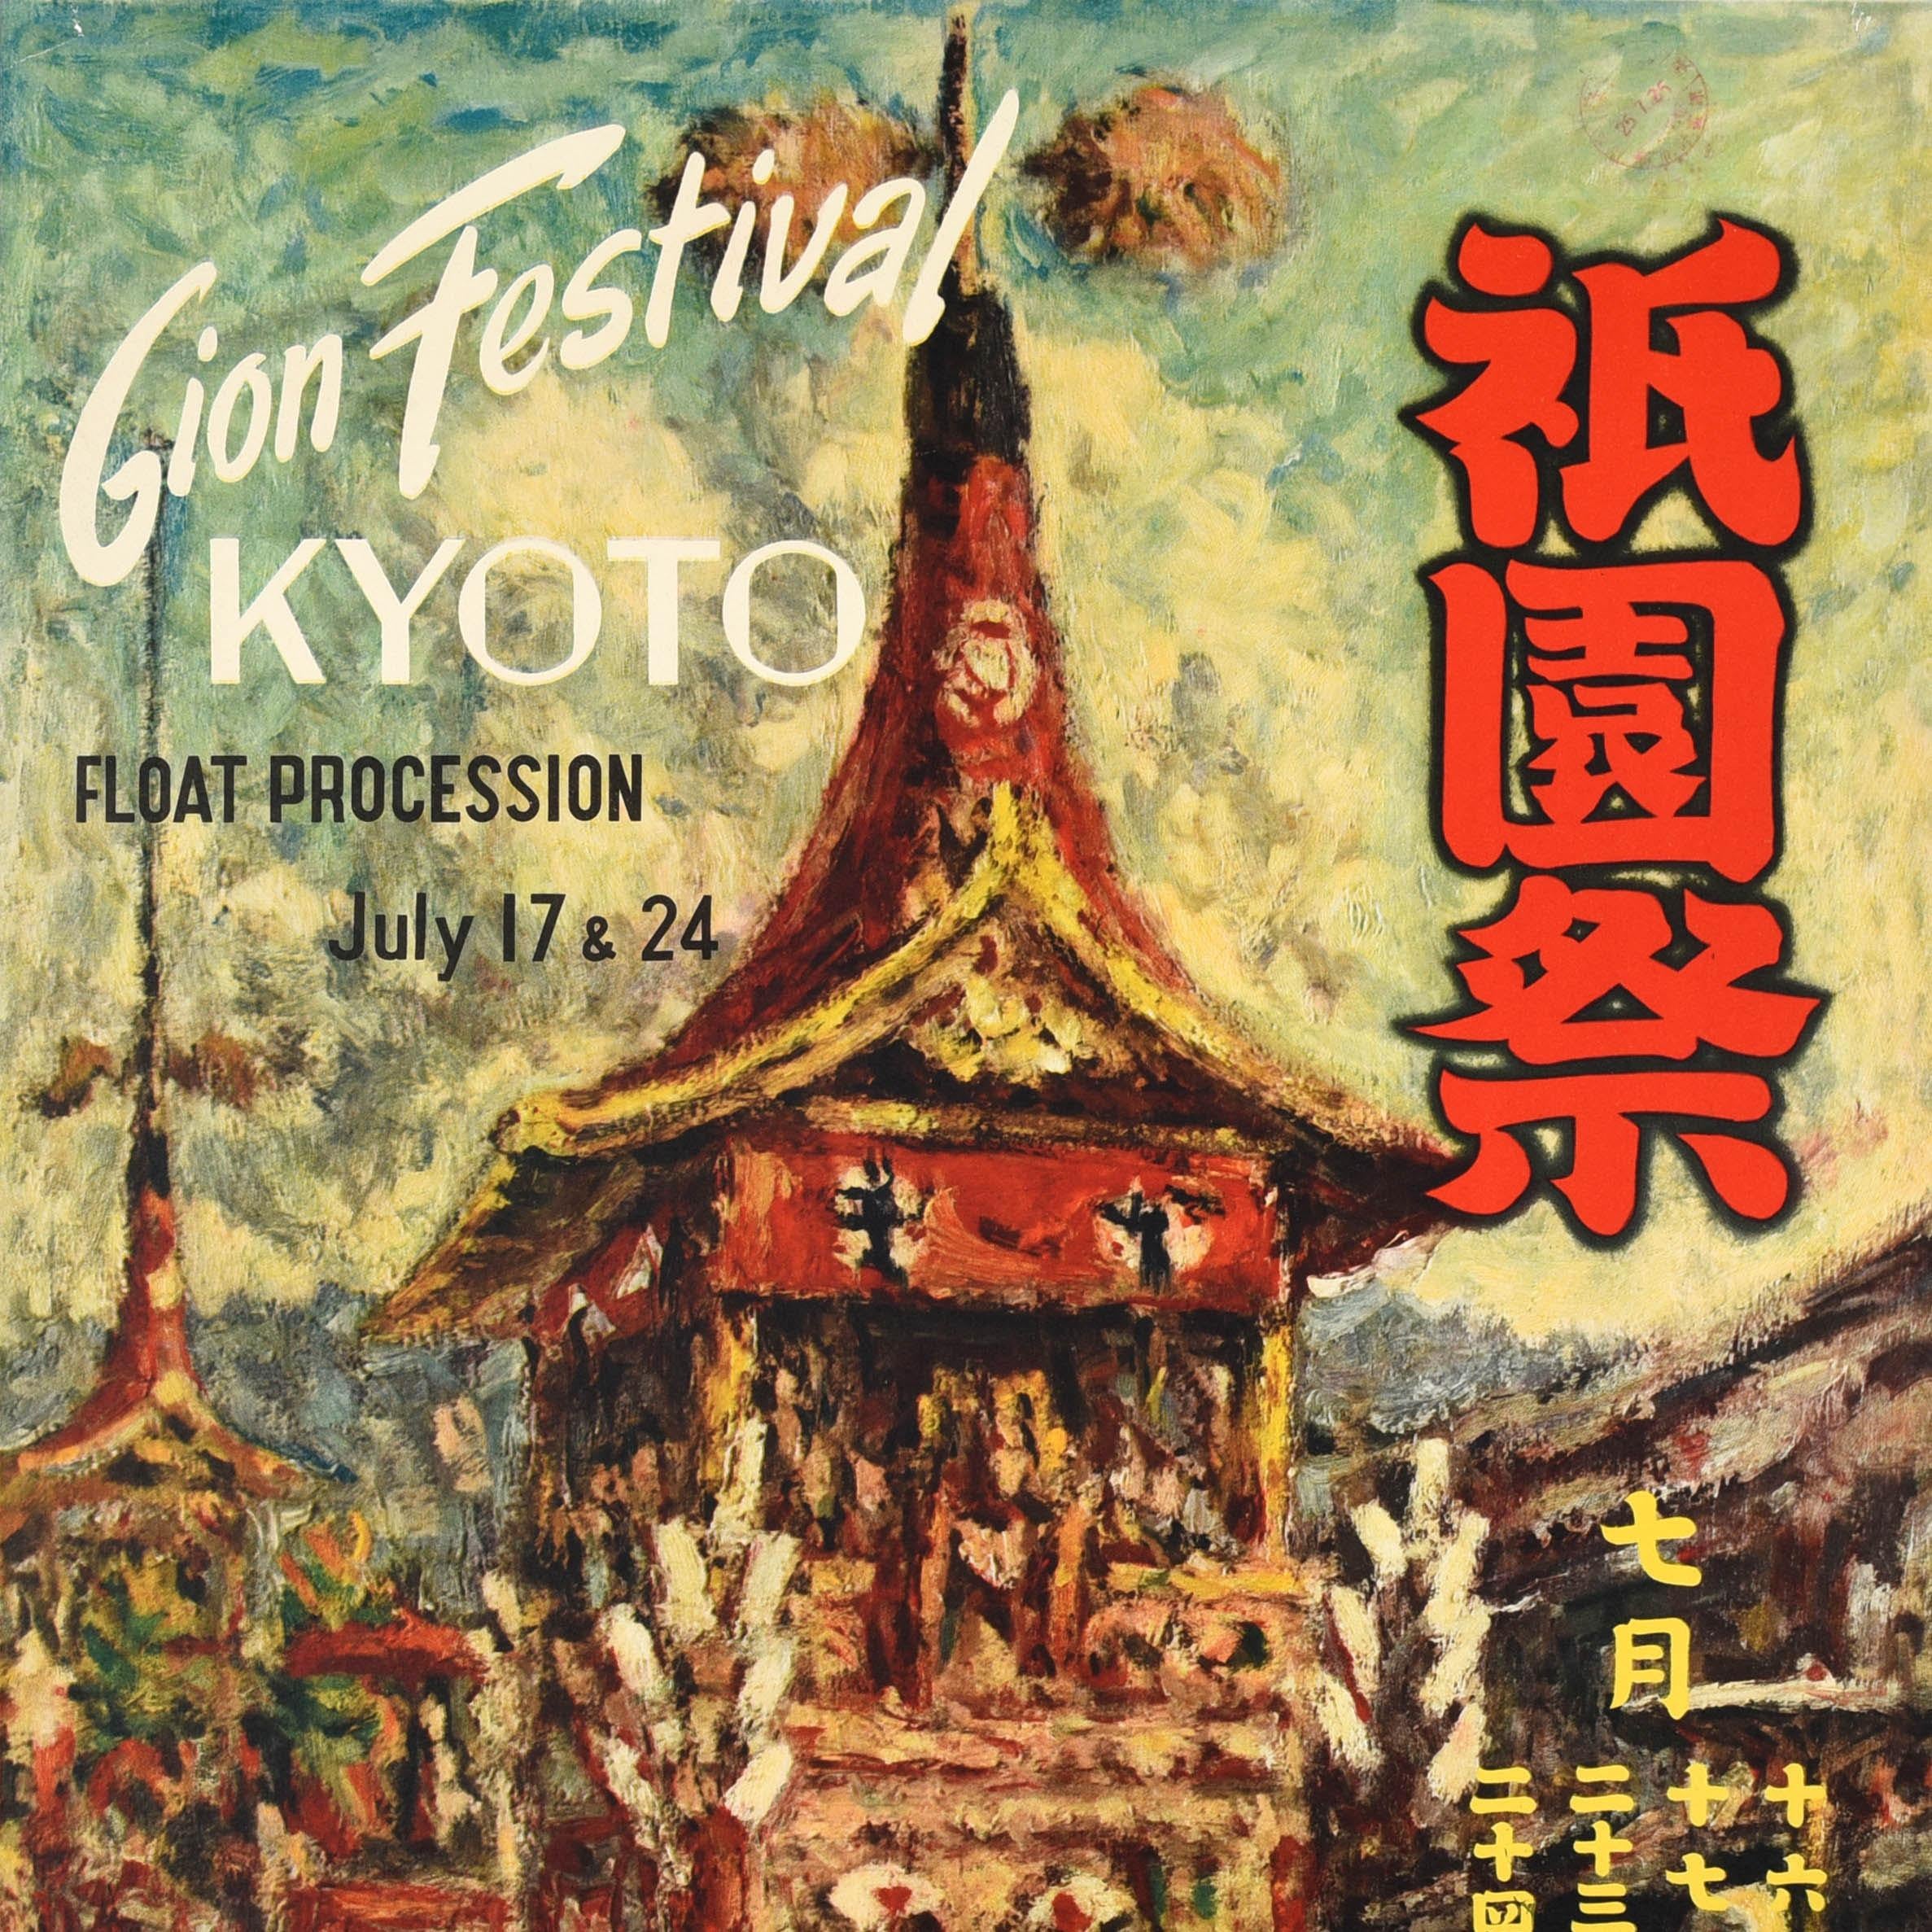 Original vintage travel poster advertising the Gion Festival Float Procession in Kyoto on 17 and 25 July featuring artwork depicting a large traditional float mounted on a wooden cart and being pulled along the road, the text in Japanese and